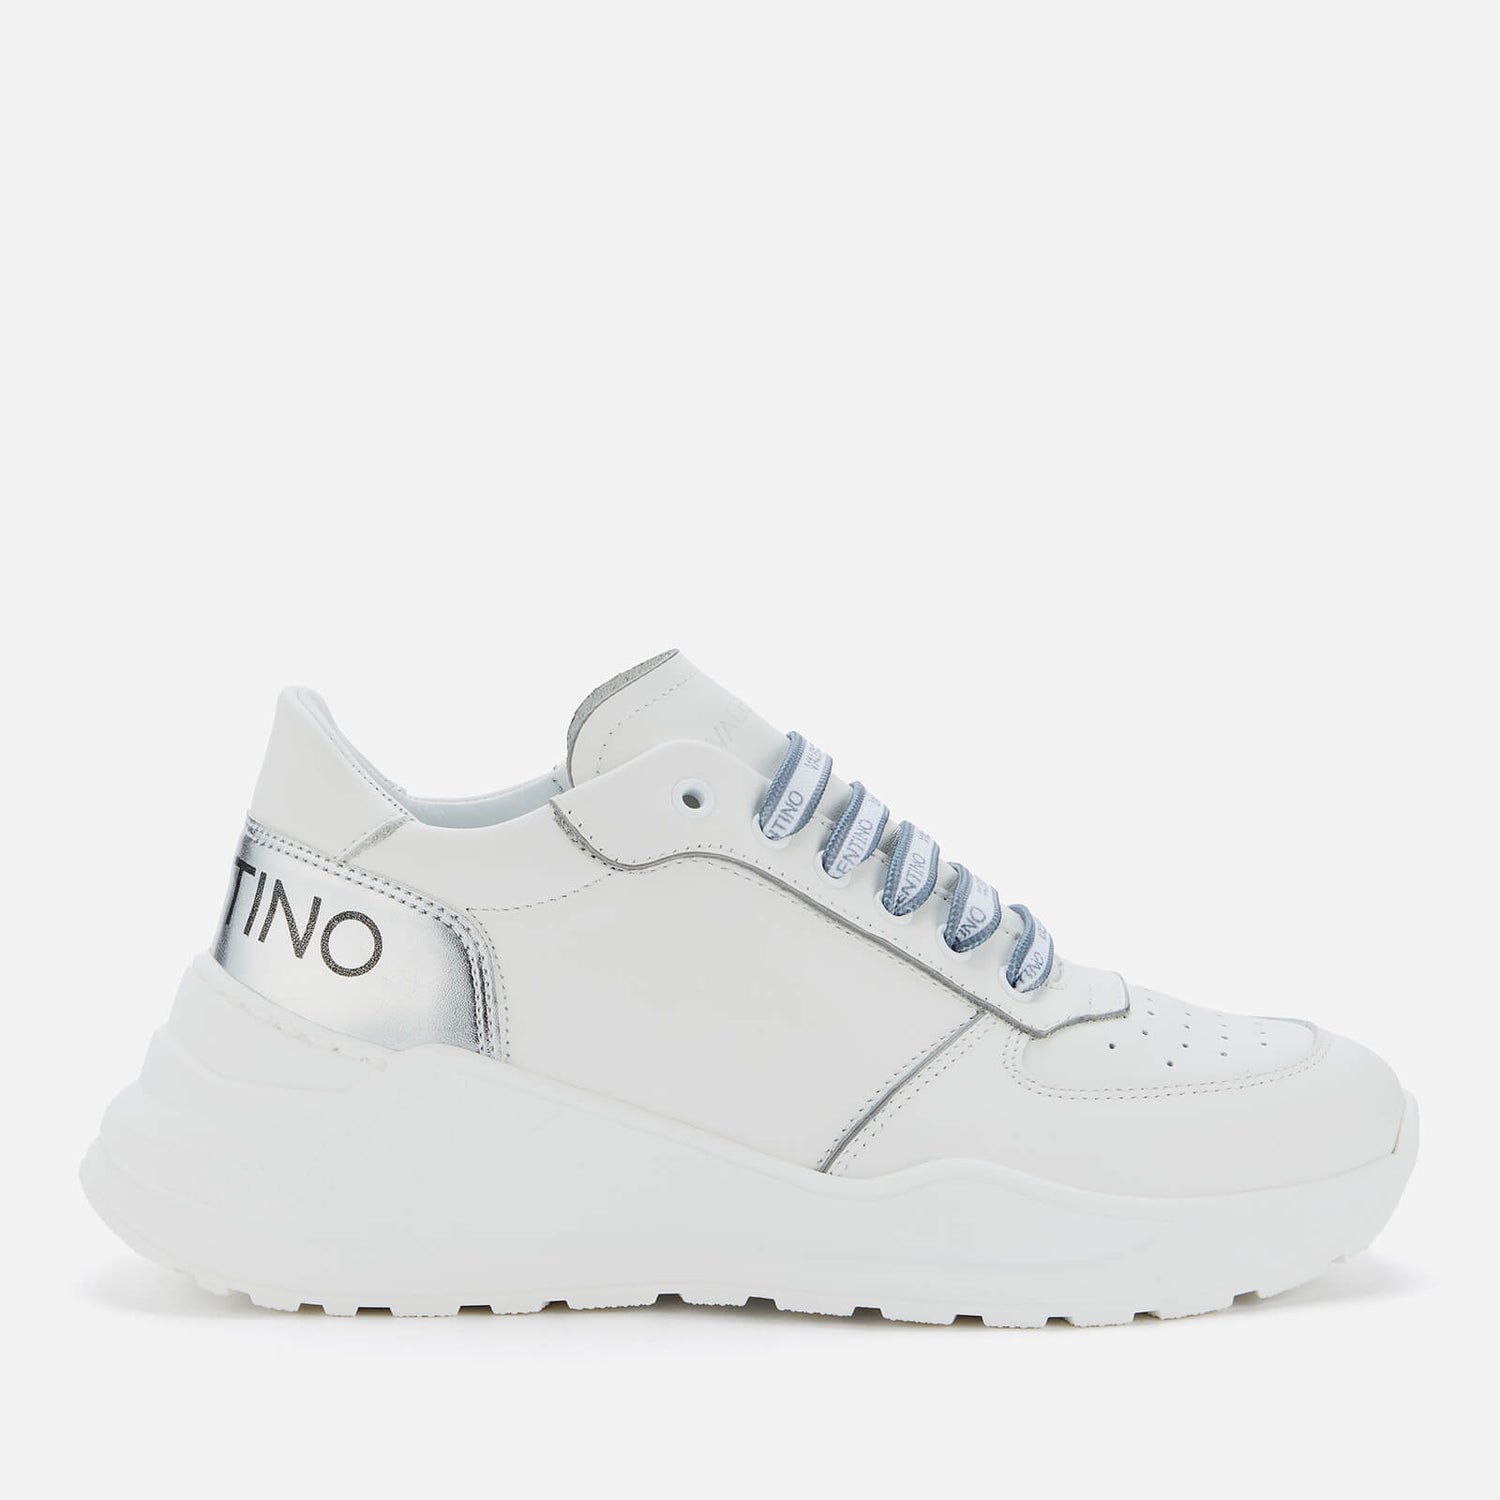 Valentino Women's Leather Running Style Trainers - White/Silver